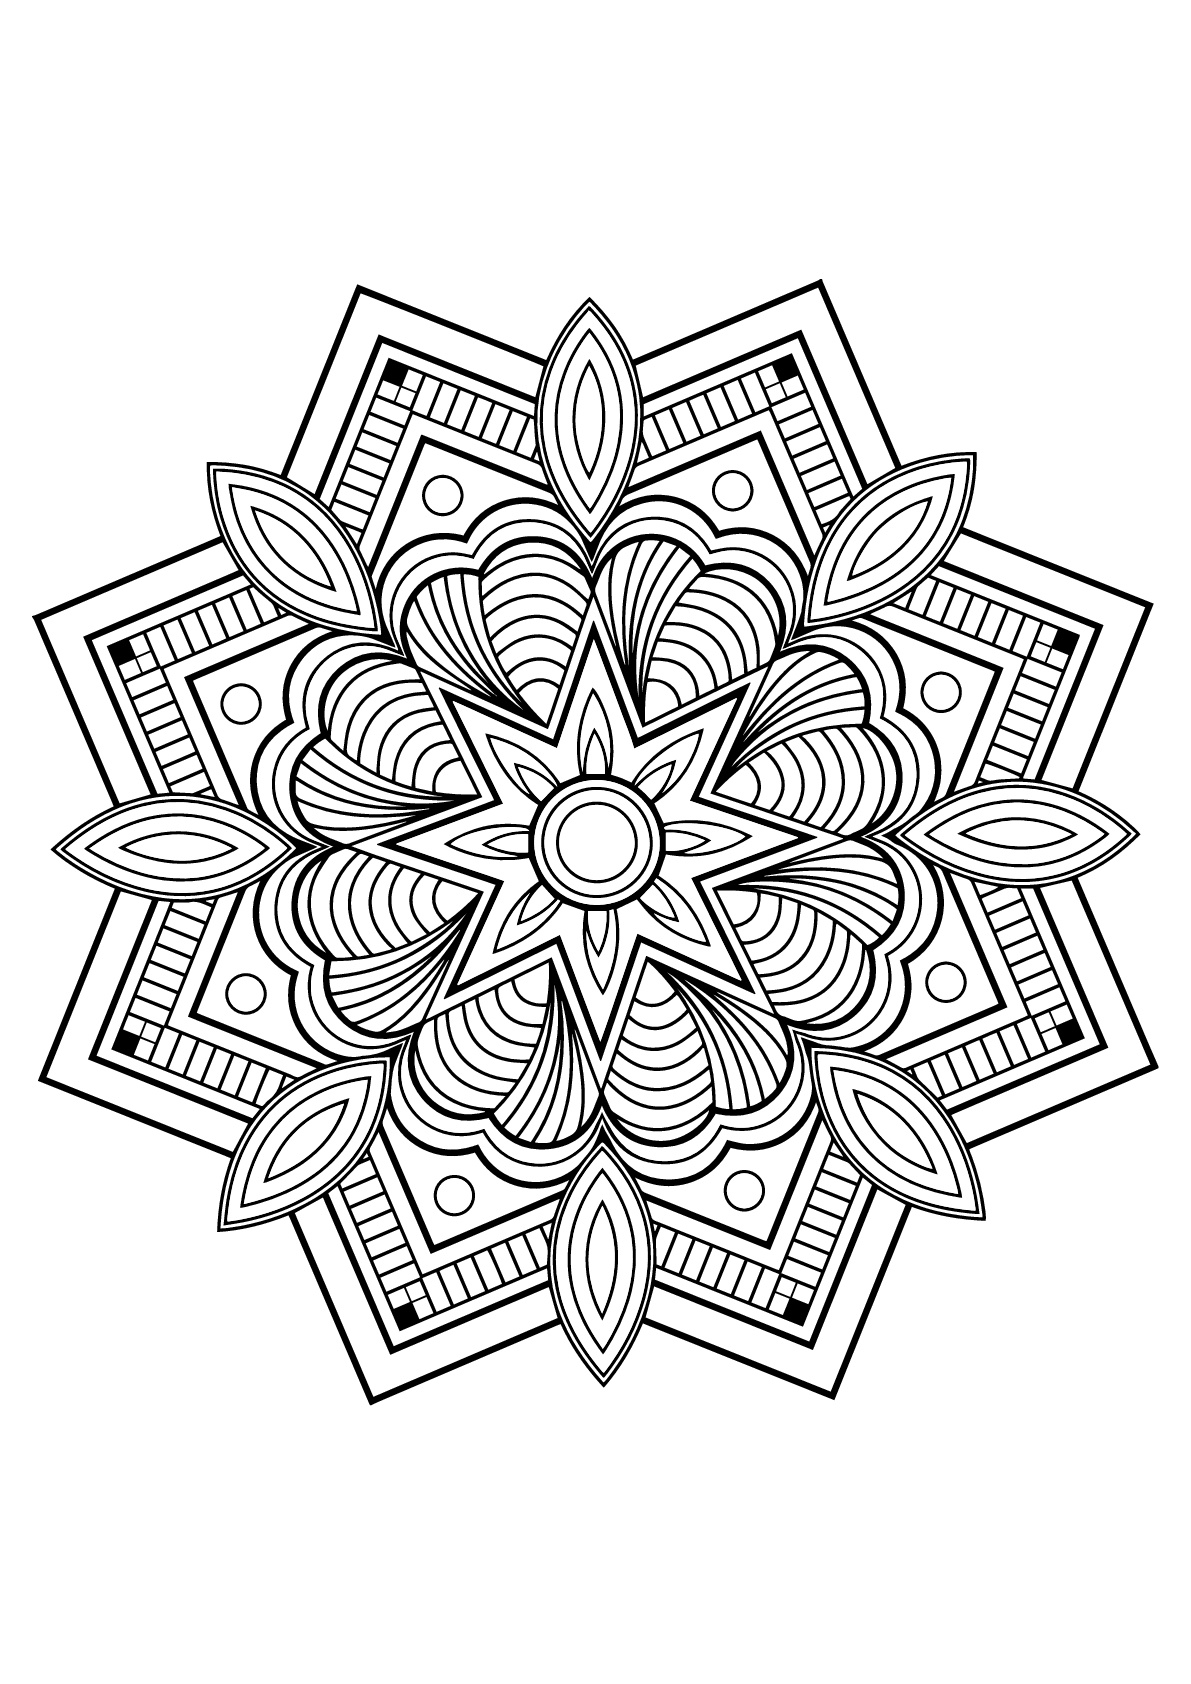 Exclusive Mandala from Free Coloring book for adults